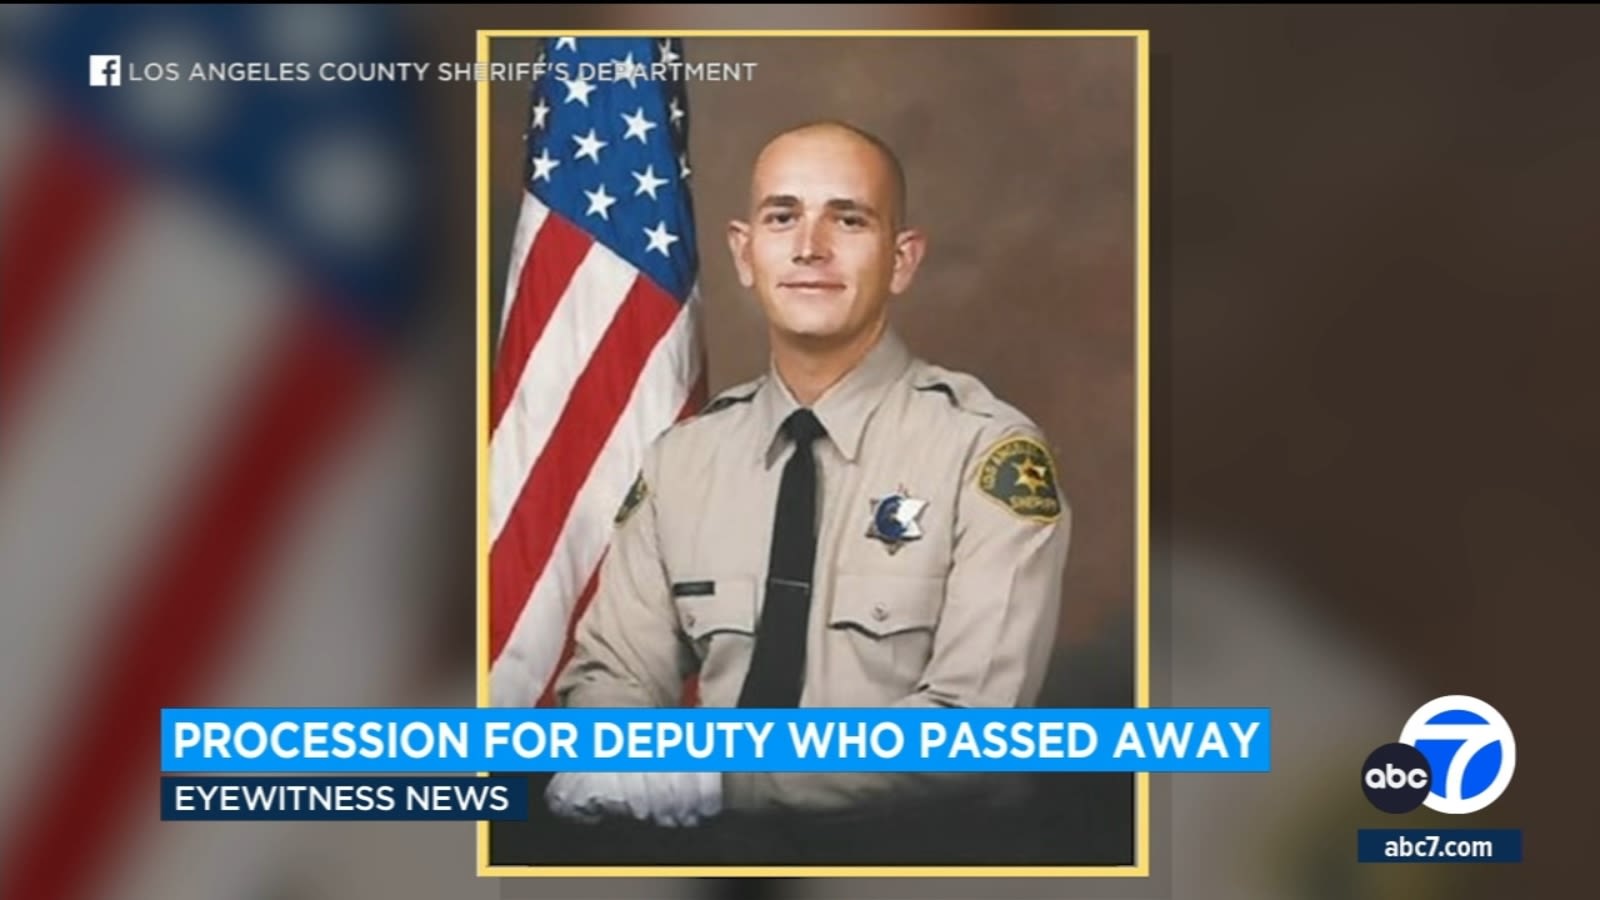 LA County sheriff's deputy died from 'effects of methamphetamine,' medical examiner finds